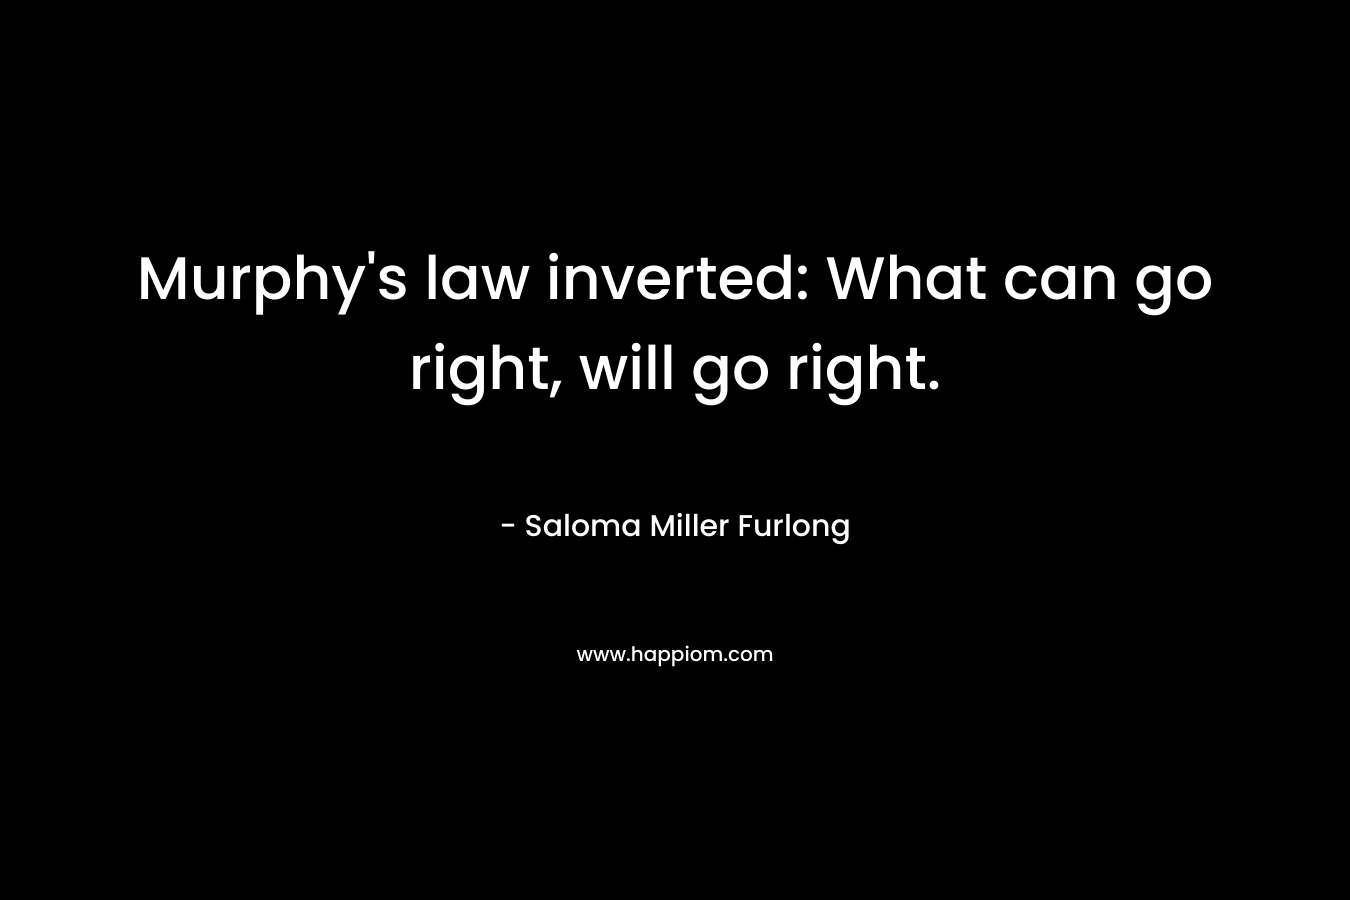 Murphy's law inverted: What can go right, will go right.